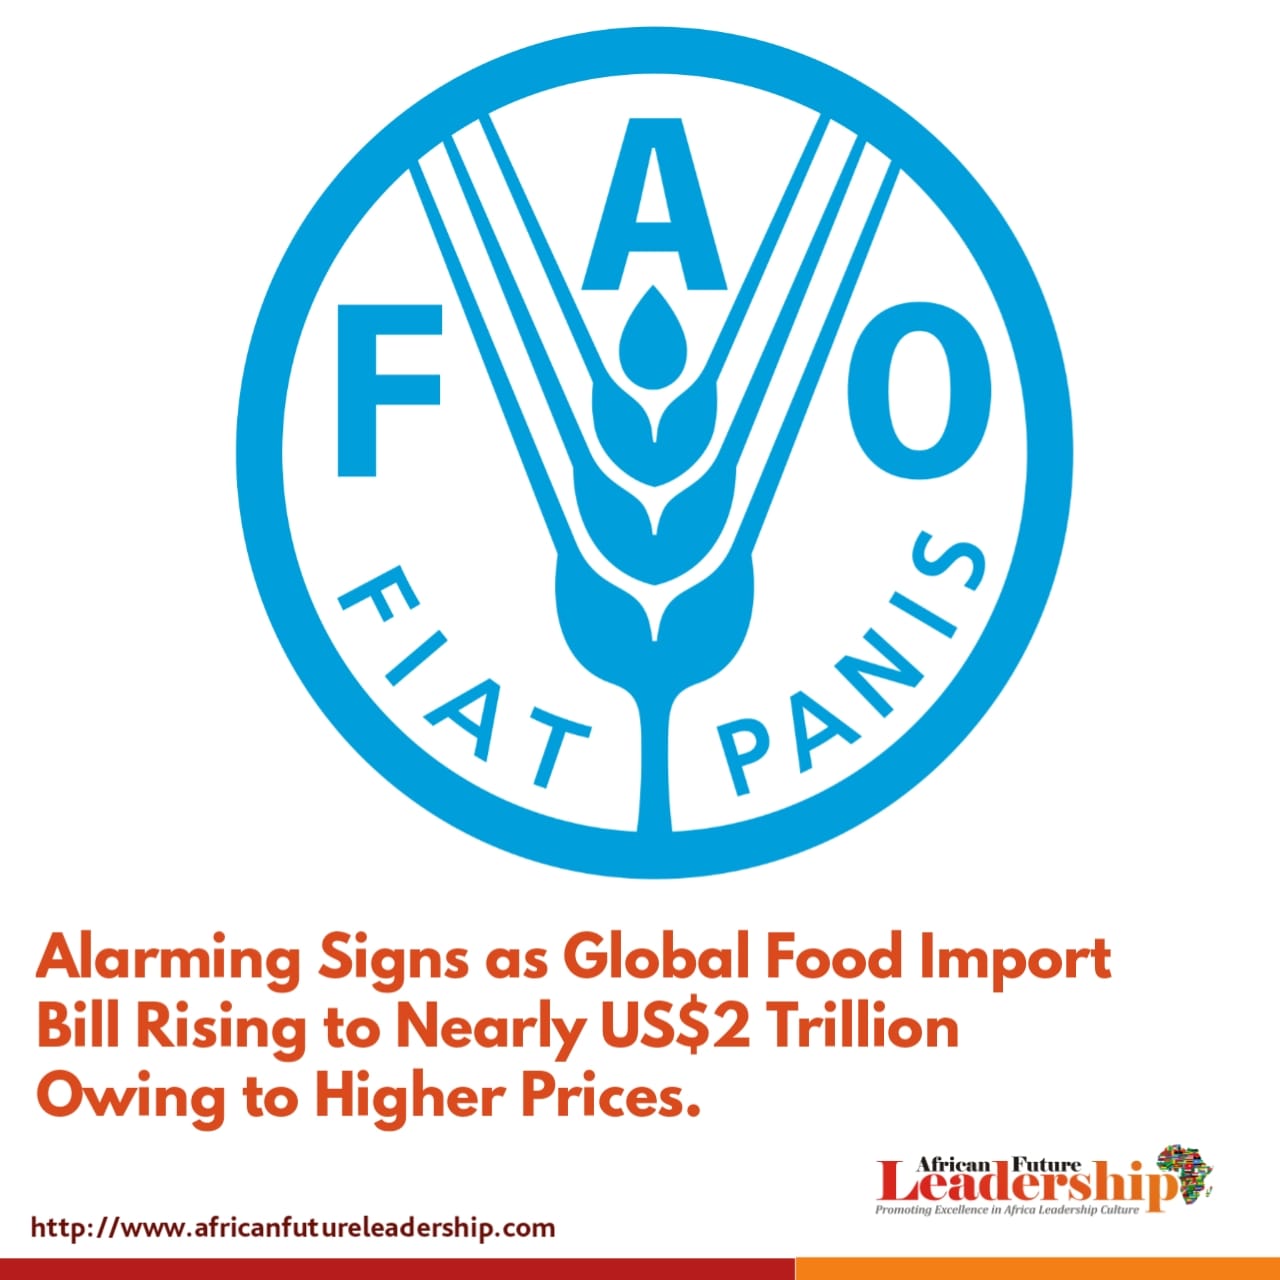 Alarming Signs as Global Food Import Bill Rising to Nearly US$2 Trillion Owing to Higher Prices